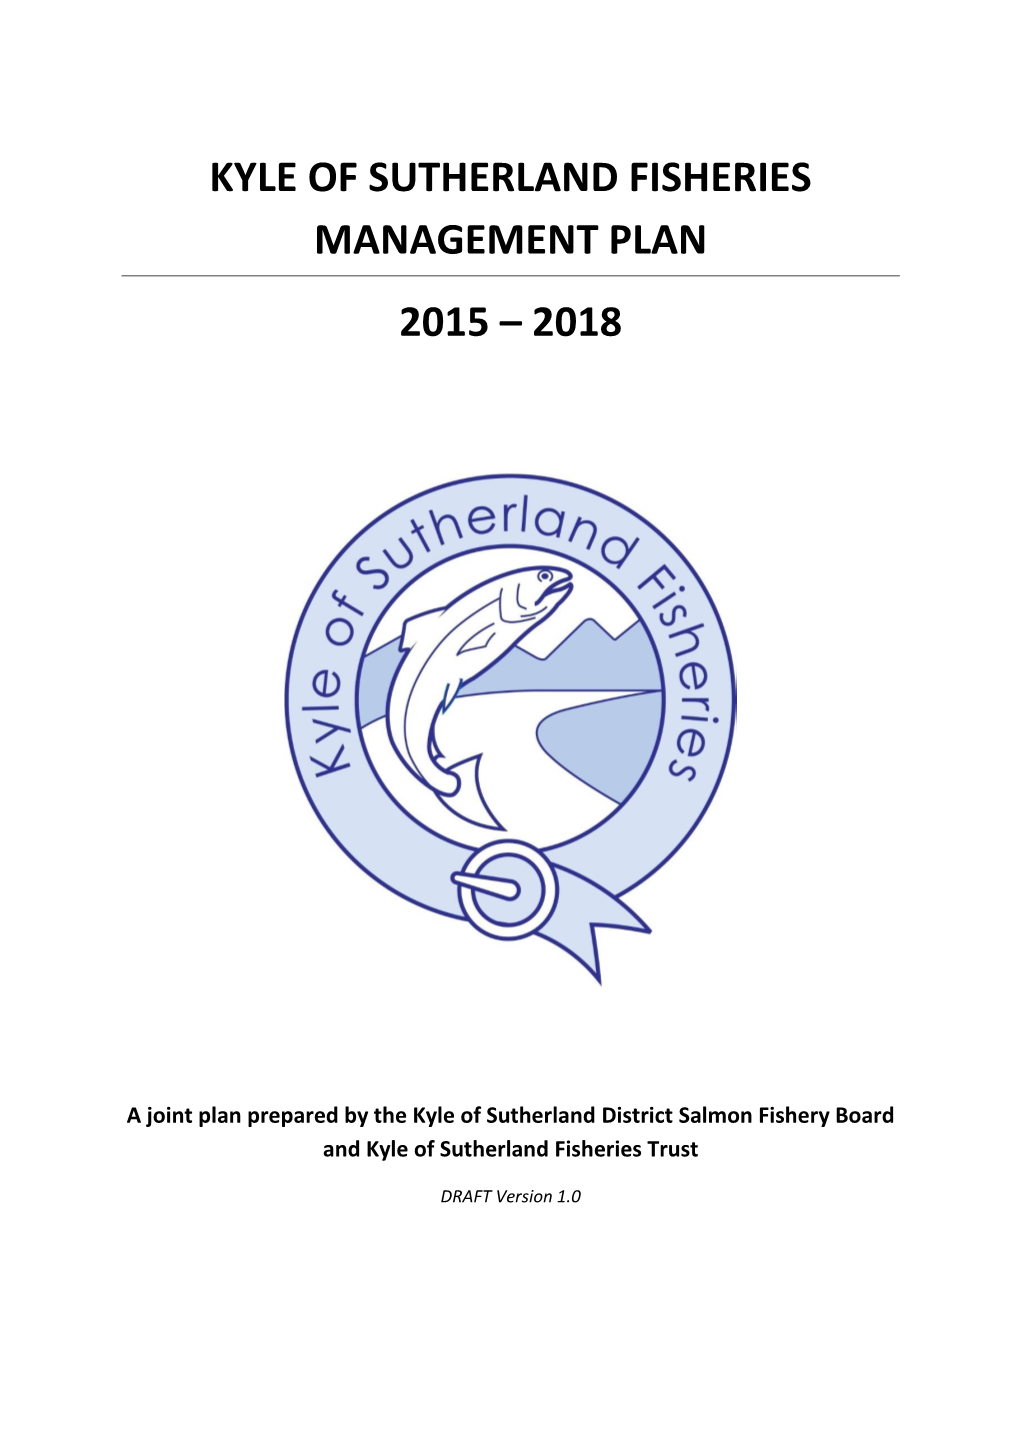 Kyle of Sutherland Fisheries Management Plan 2015 – 2018